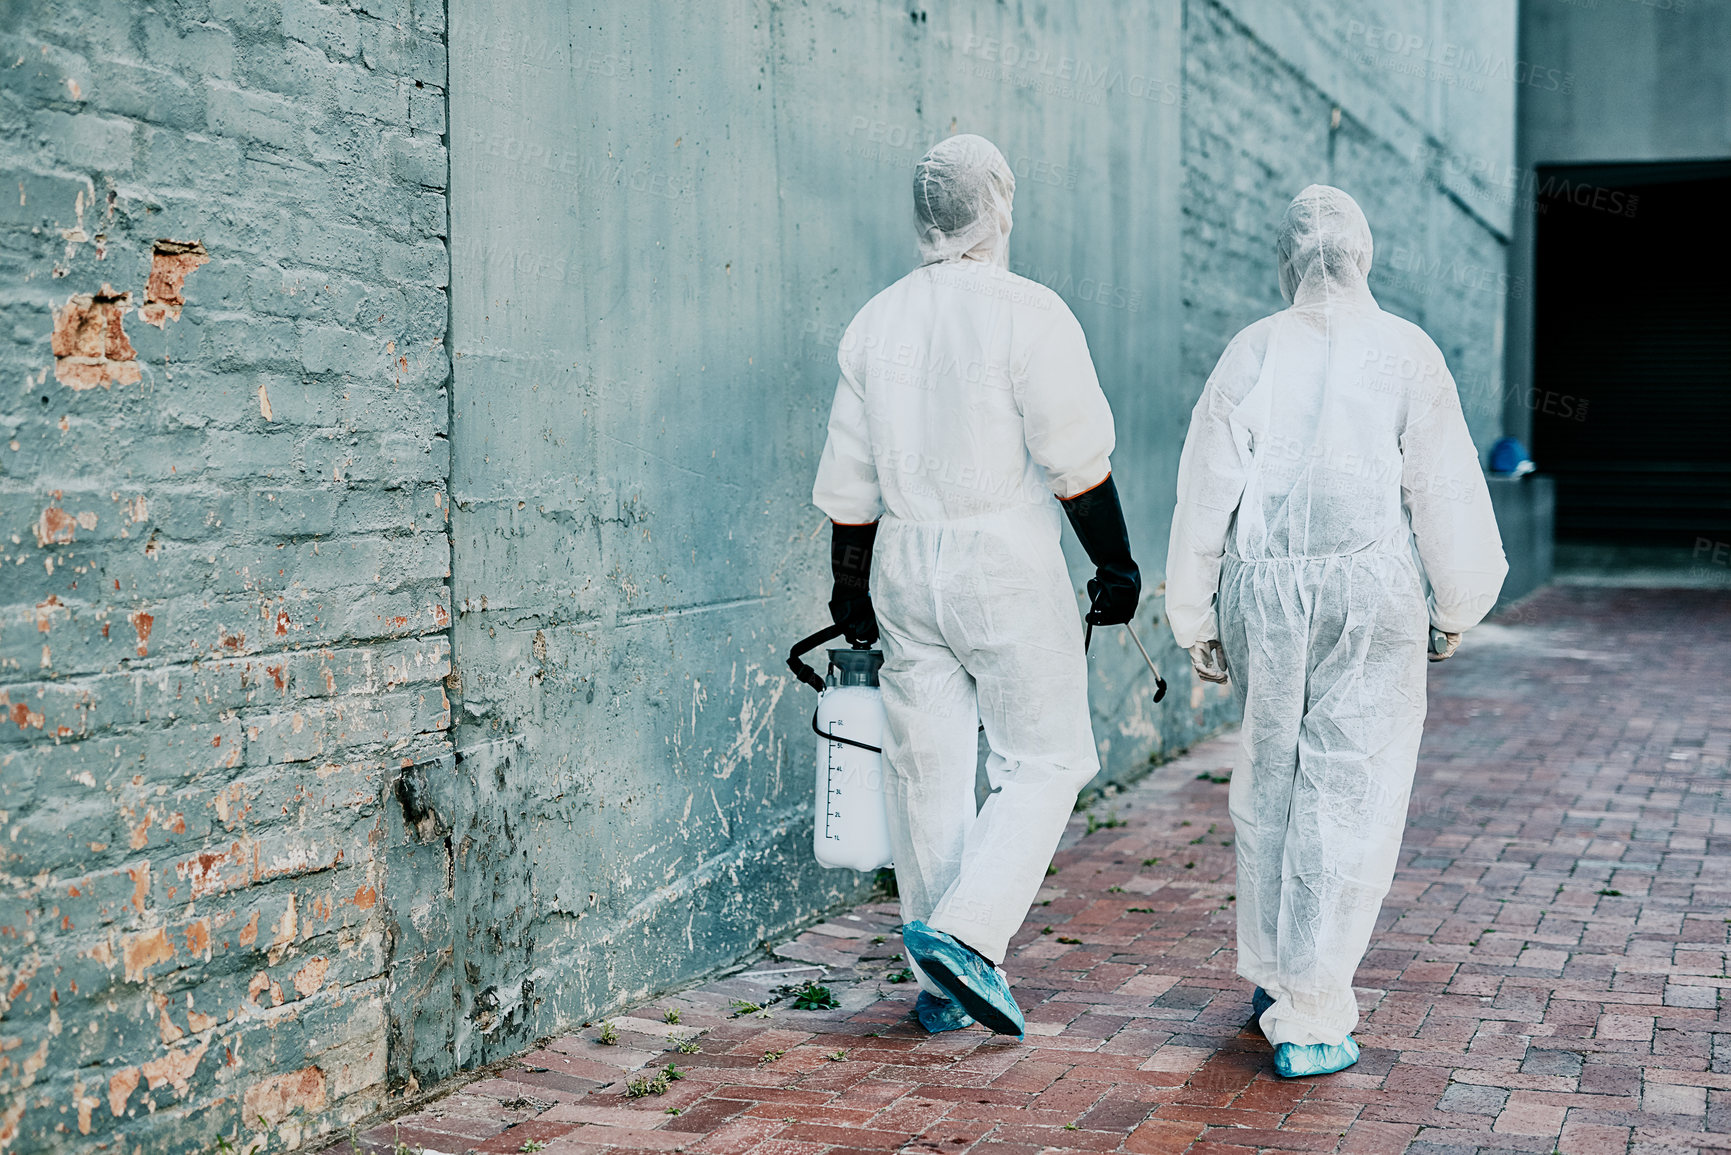 Buy stock photo Healthcare workers wearing protective hazmat suits to help prevent the spread of a toxic infection or covid pandemic. First responders cleaning a building for better hygiene and safety